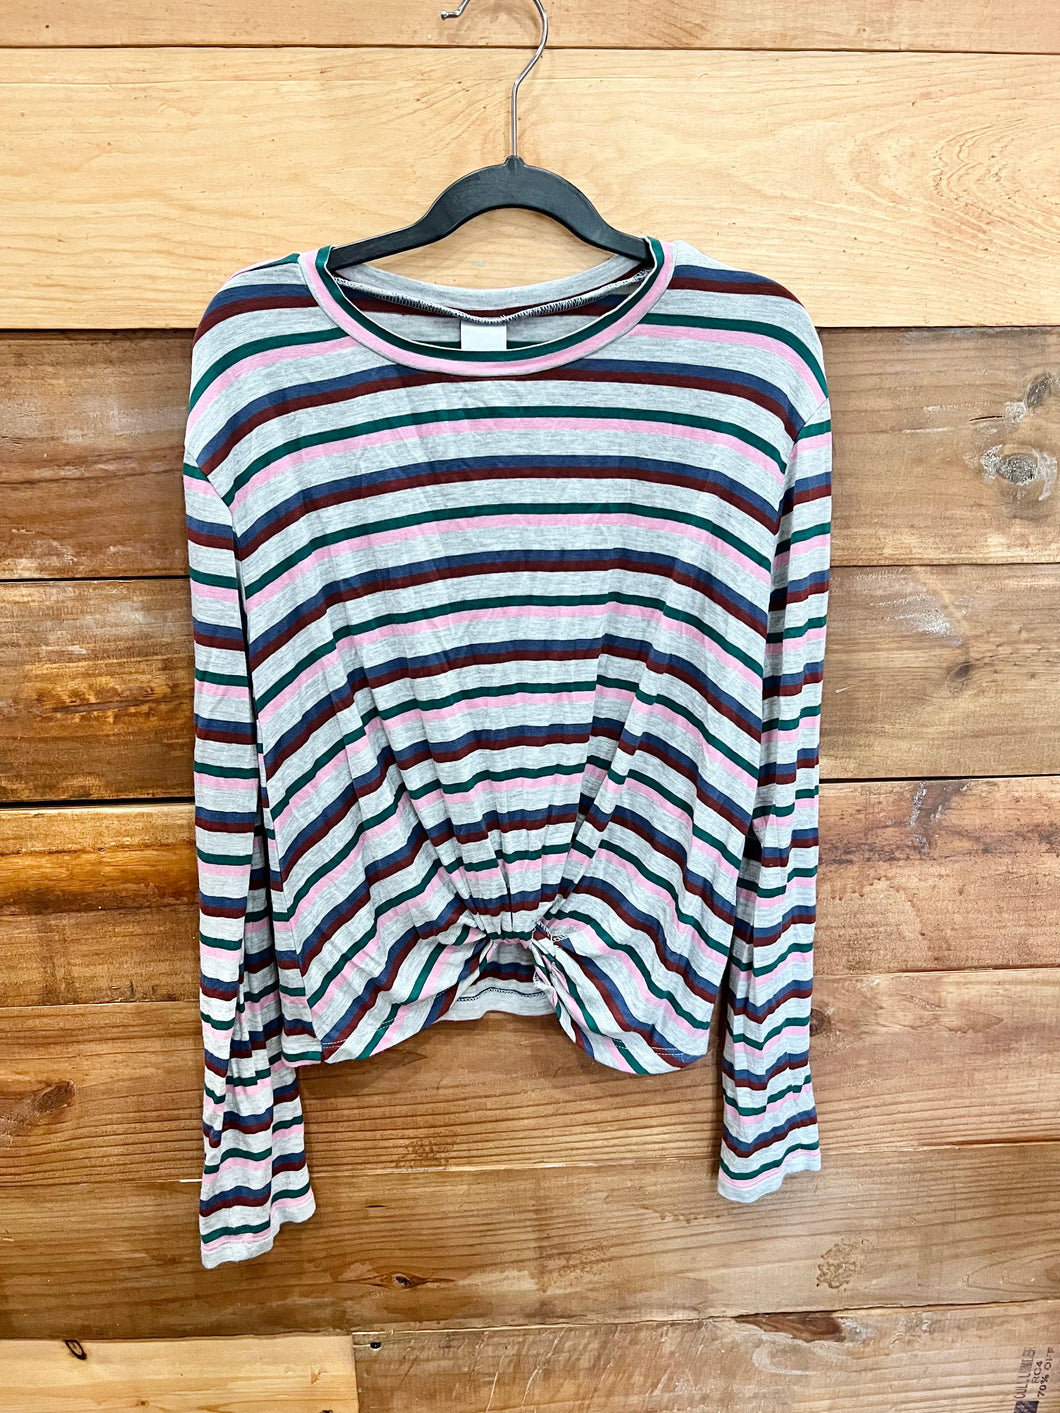 Nordstrom Striped Top Size 10-12